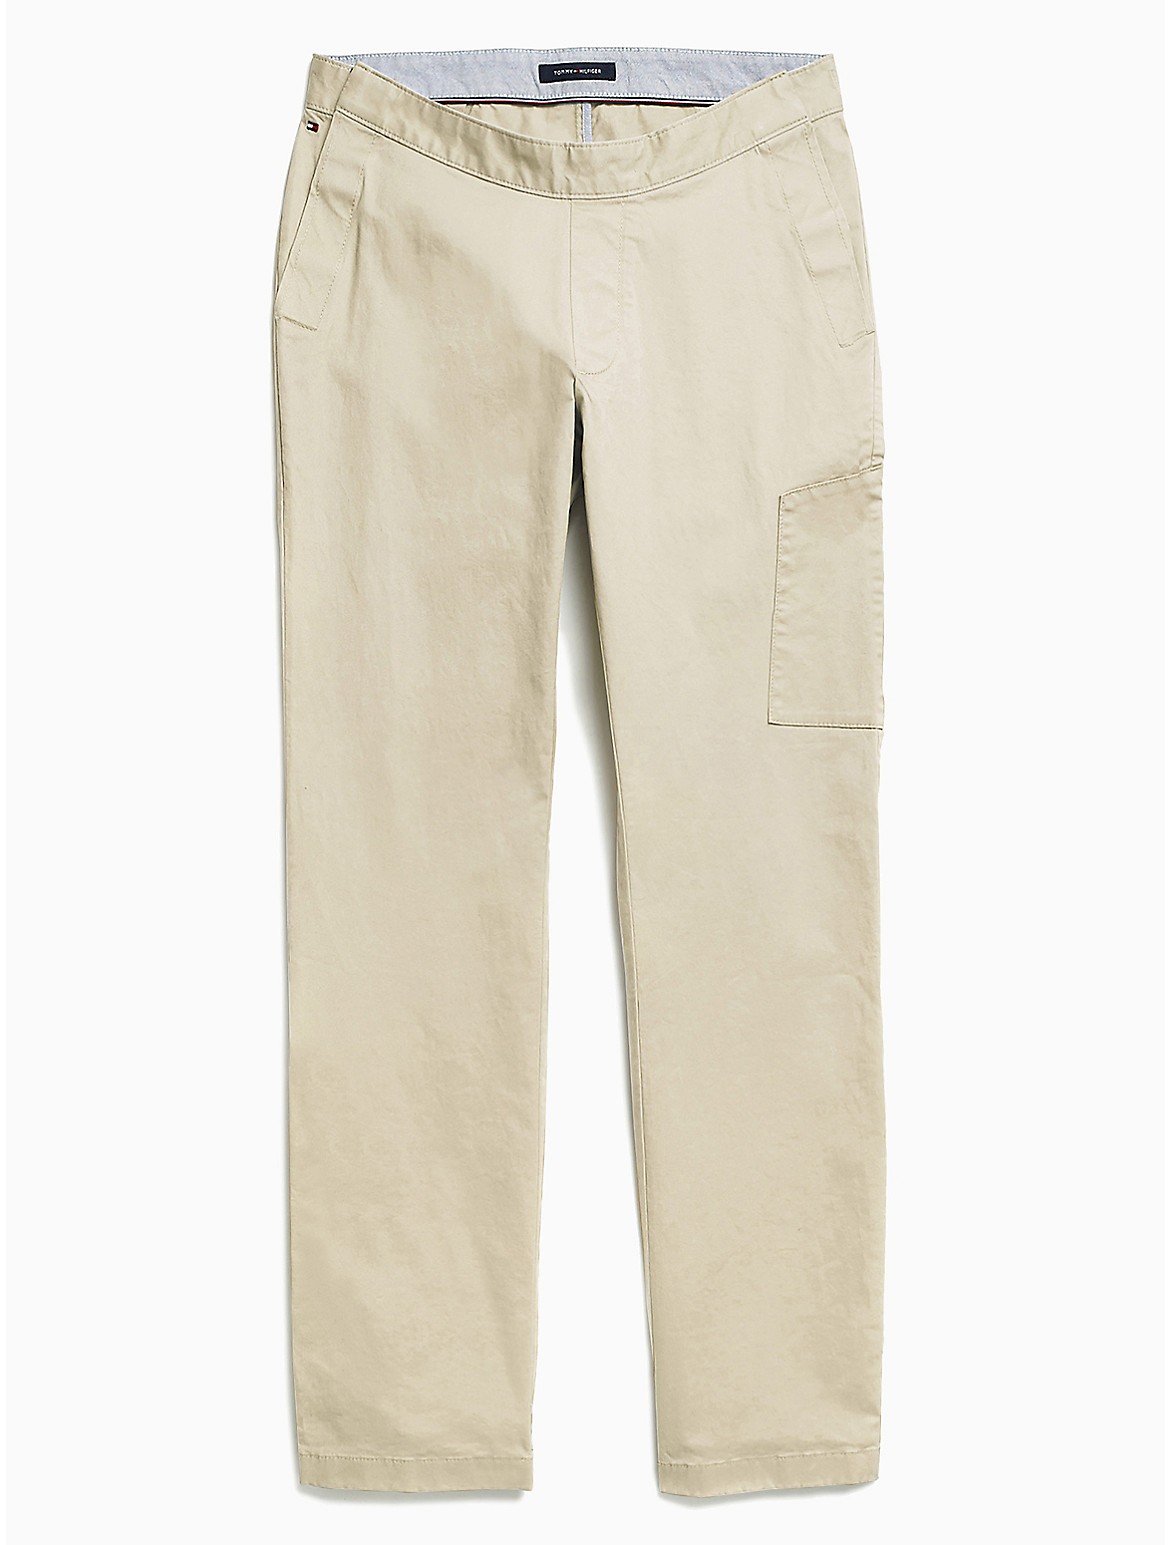 Tommy Hilfiger Men's Seated Fit Classic Chino